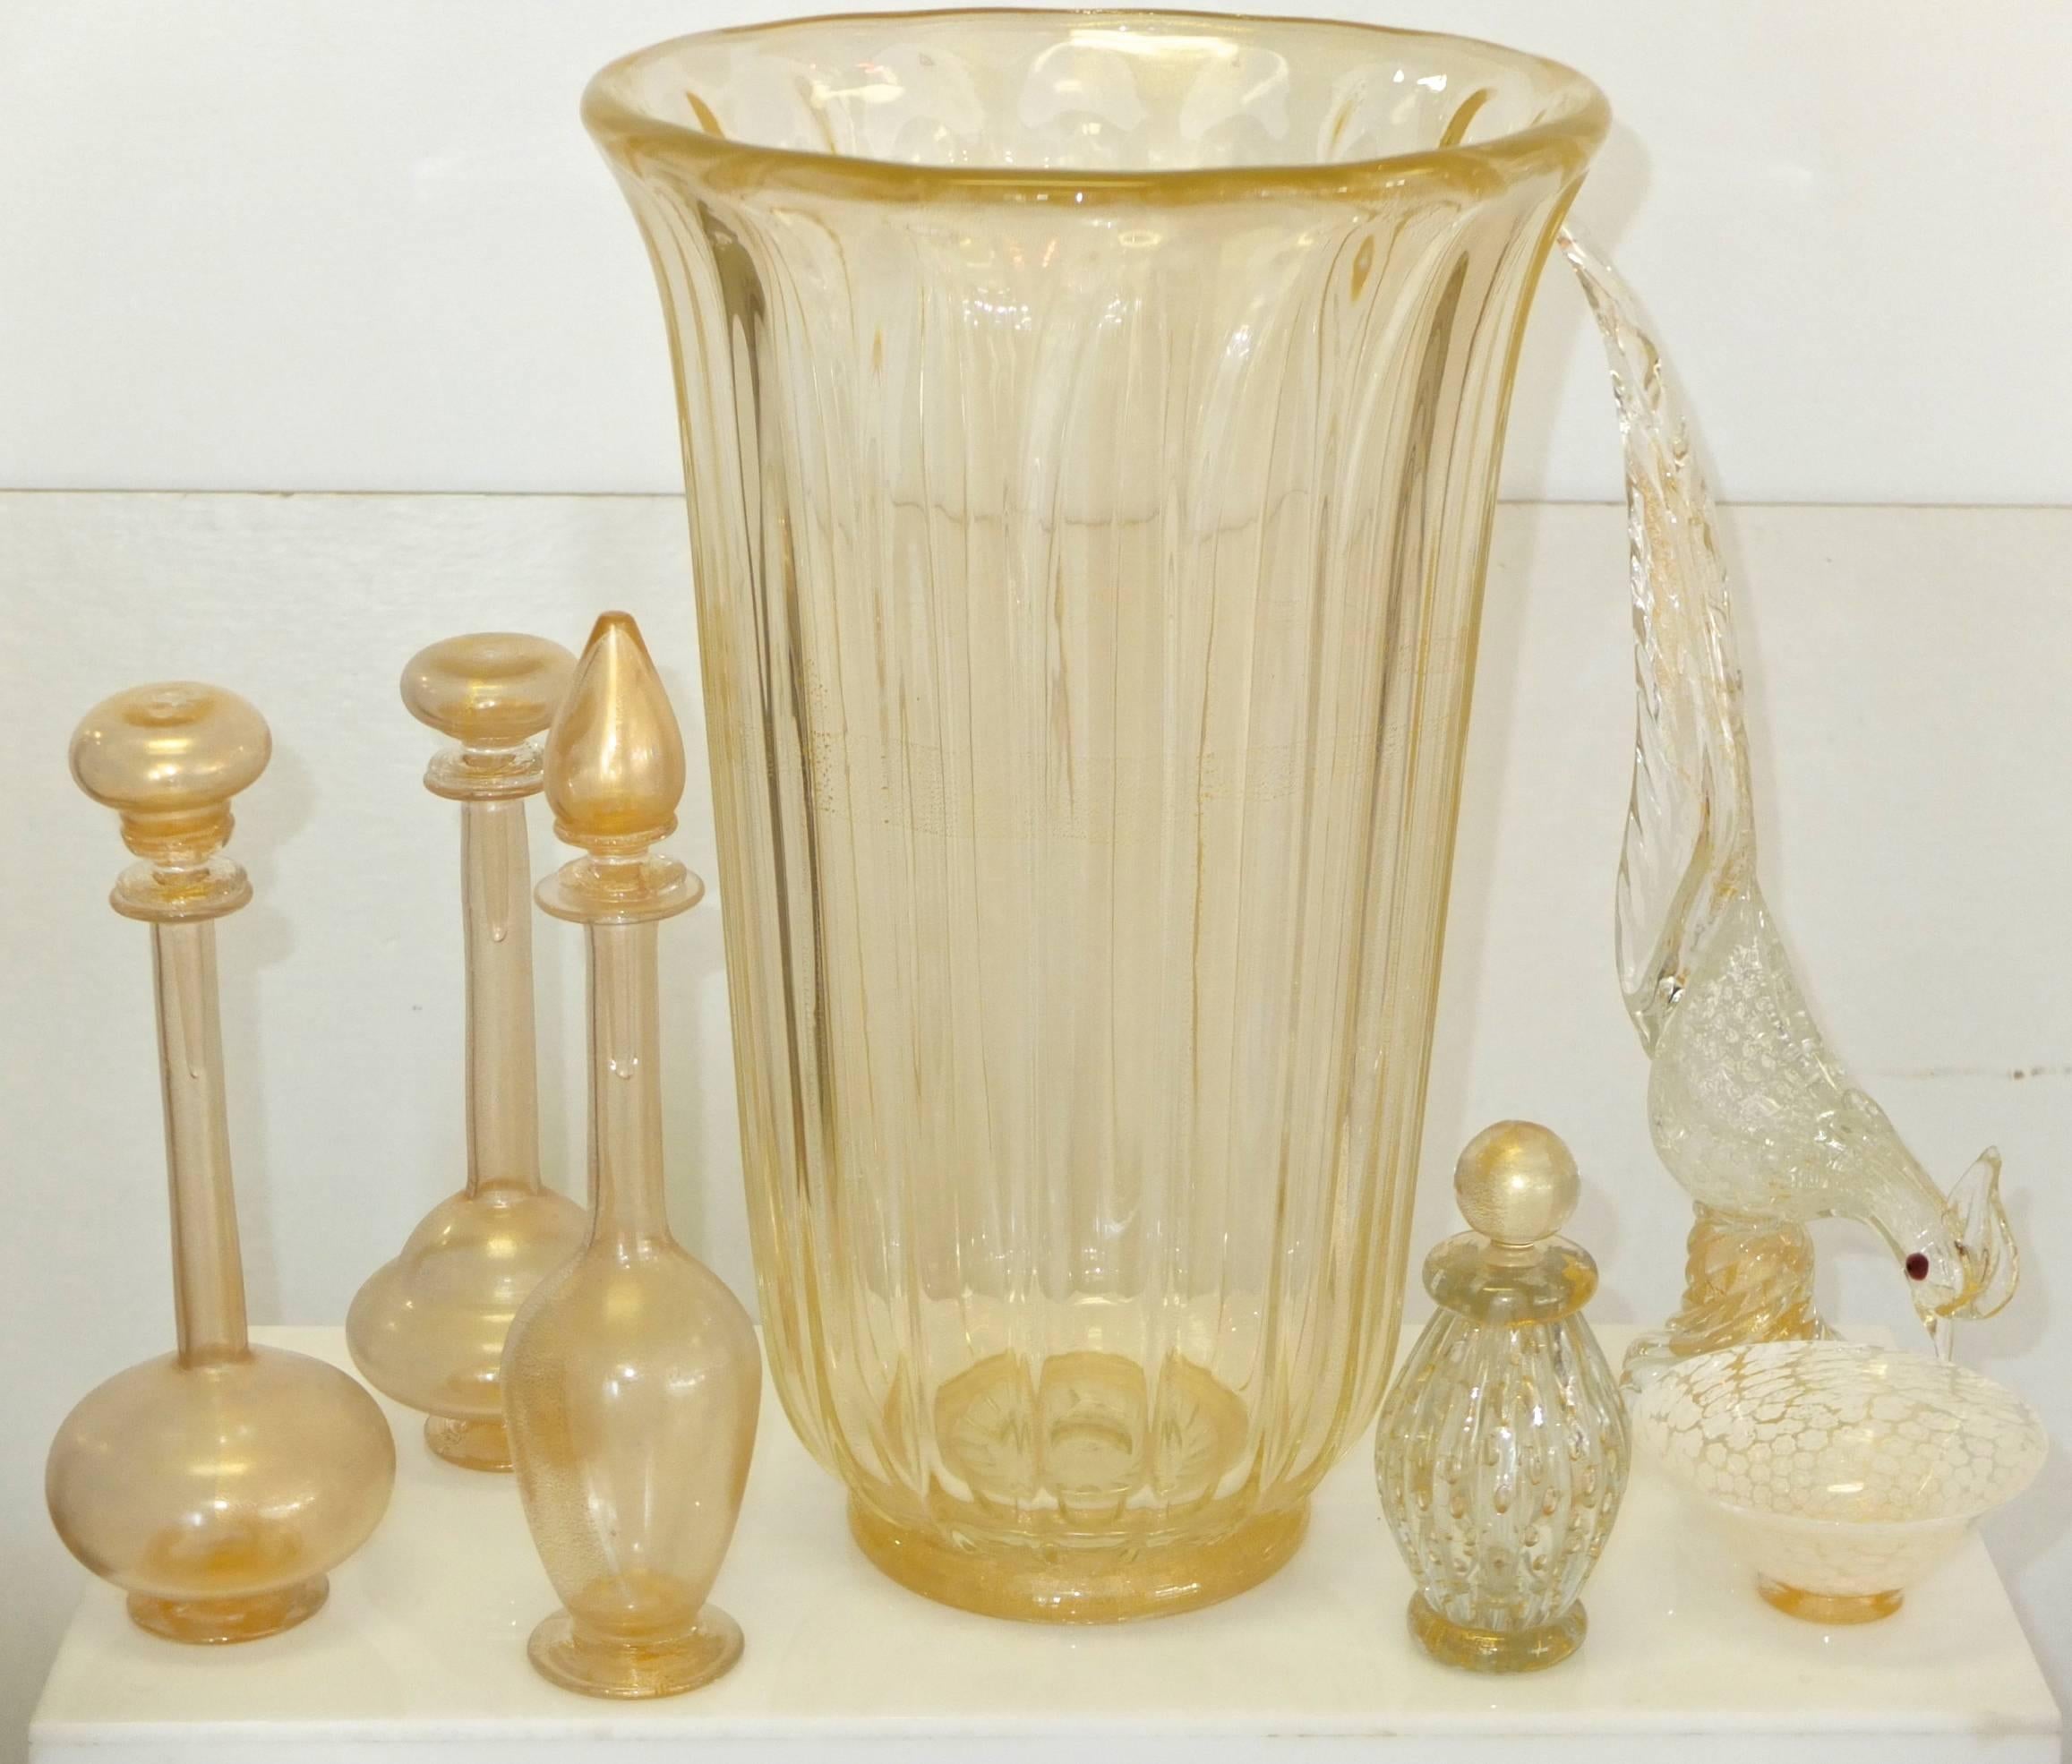 Presented here is a stylish collection of six items for Madame's Boudoir: four signed Murano glass perfume bottles with stoppers, a footed bowl and an elegant avian figure, all with embedded bubbles and gold flecks in the style of Archimede Seguso.